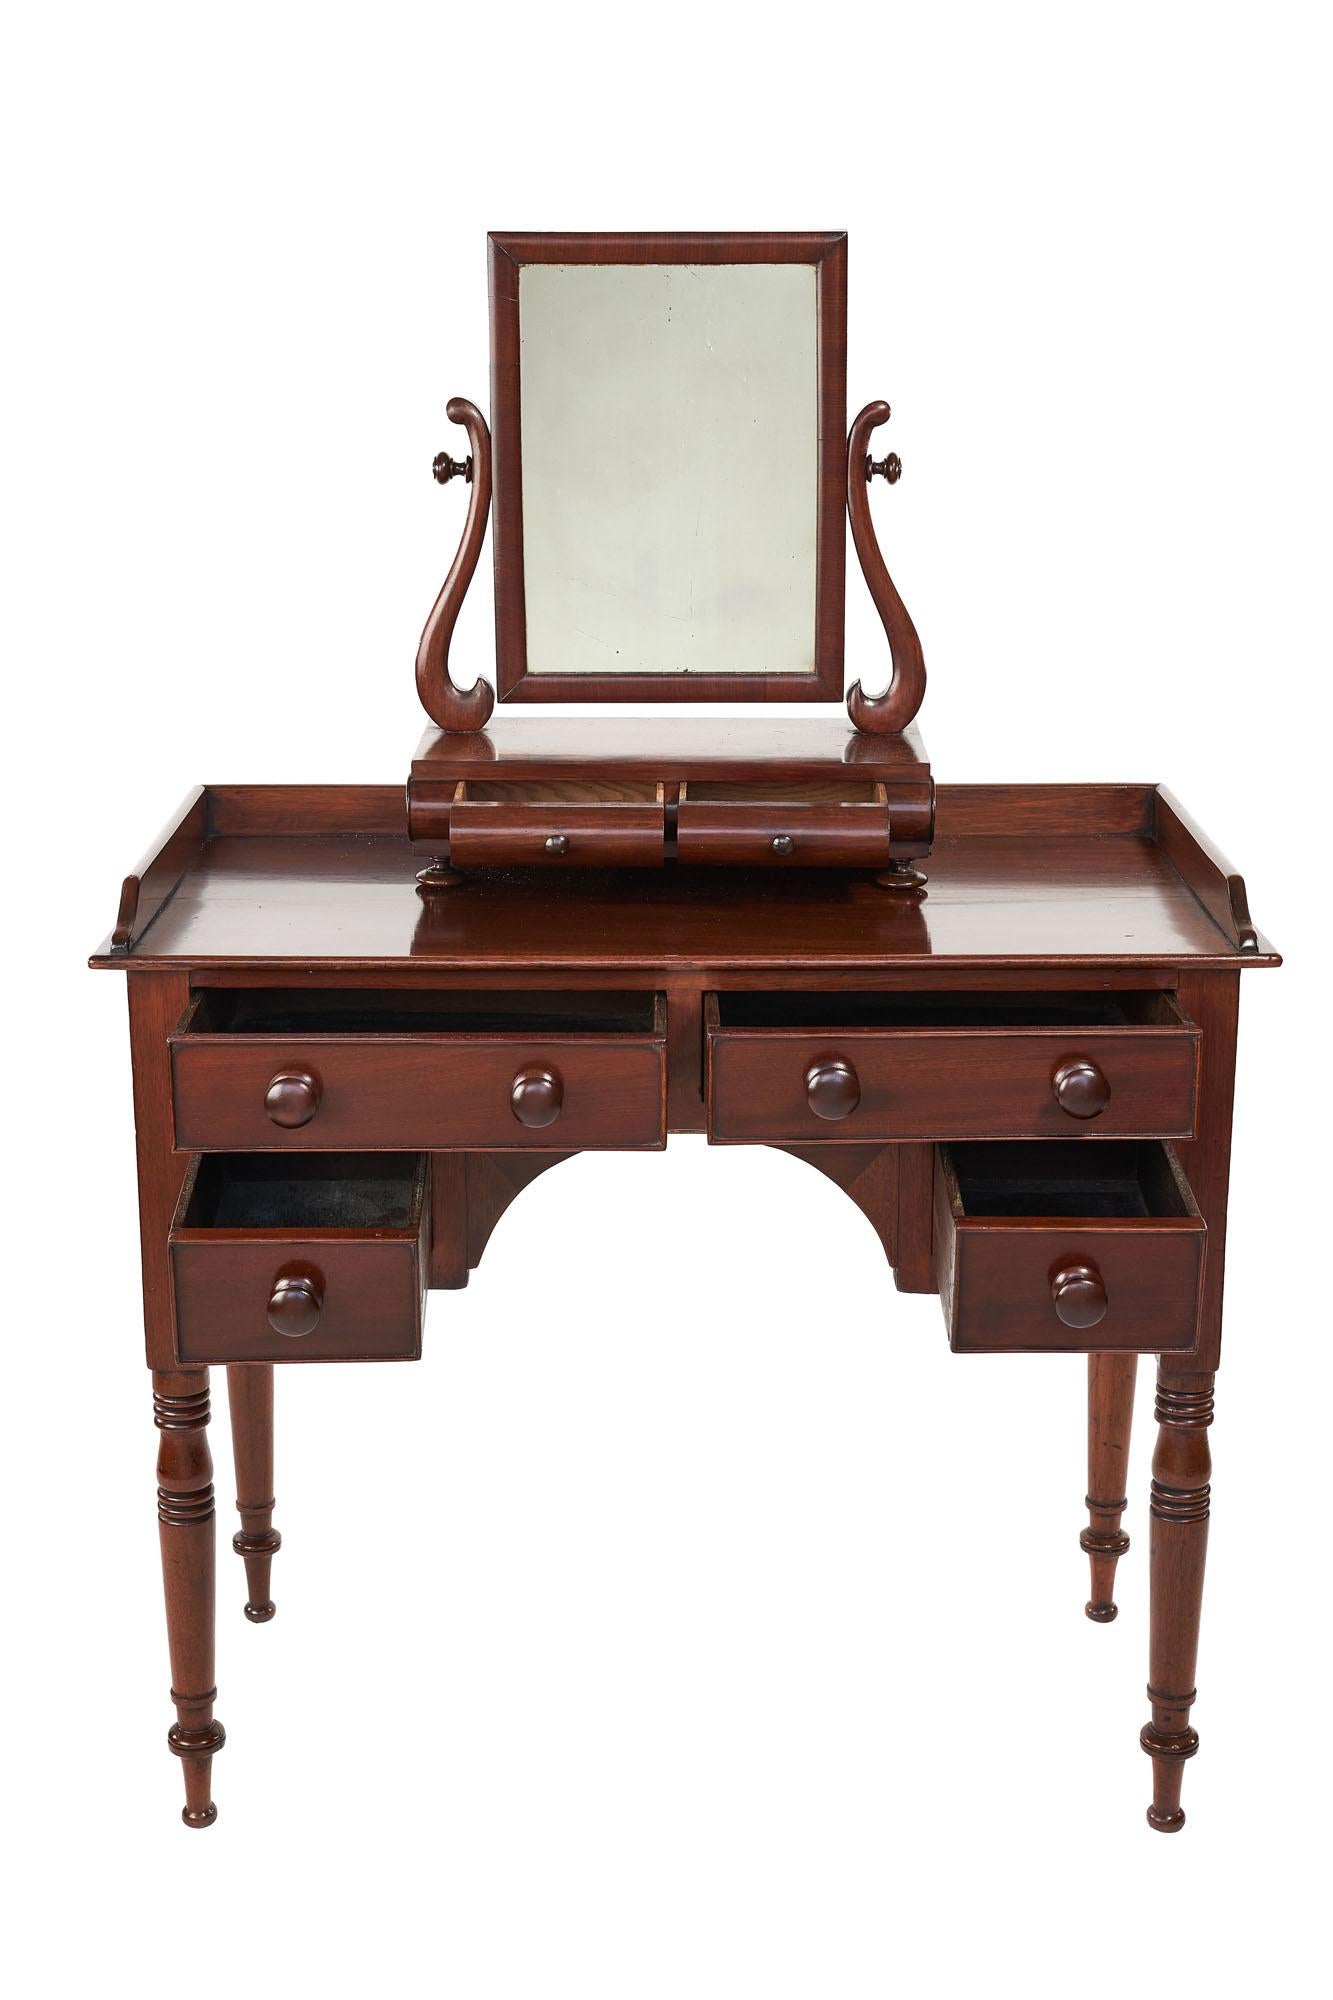 Small antique William IV mahogany vanity/dressing table with swing mirror having a quality mahogany top with mahogany three quarter gallery, mahogany mirror with S shaped supports, two drawers to the base with original mahogany knobs and bun feet,